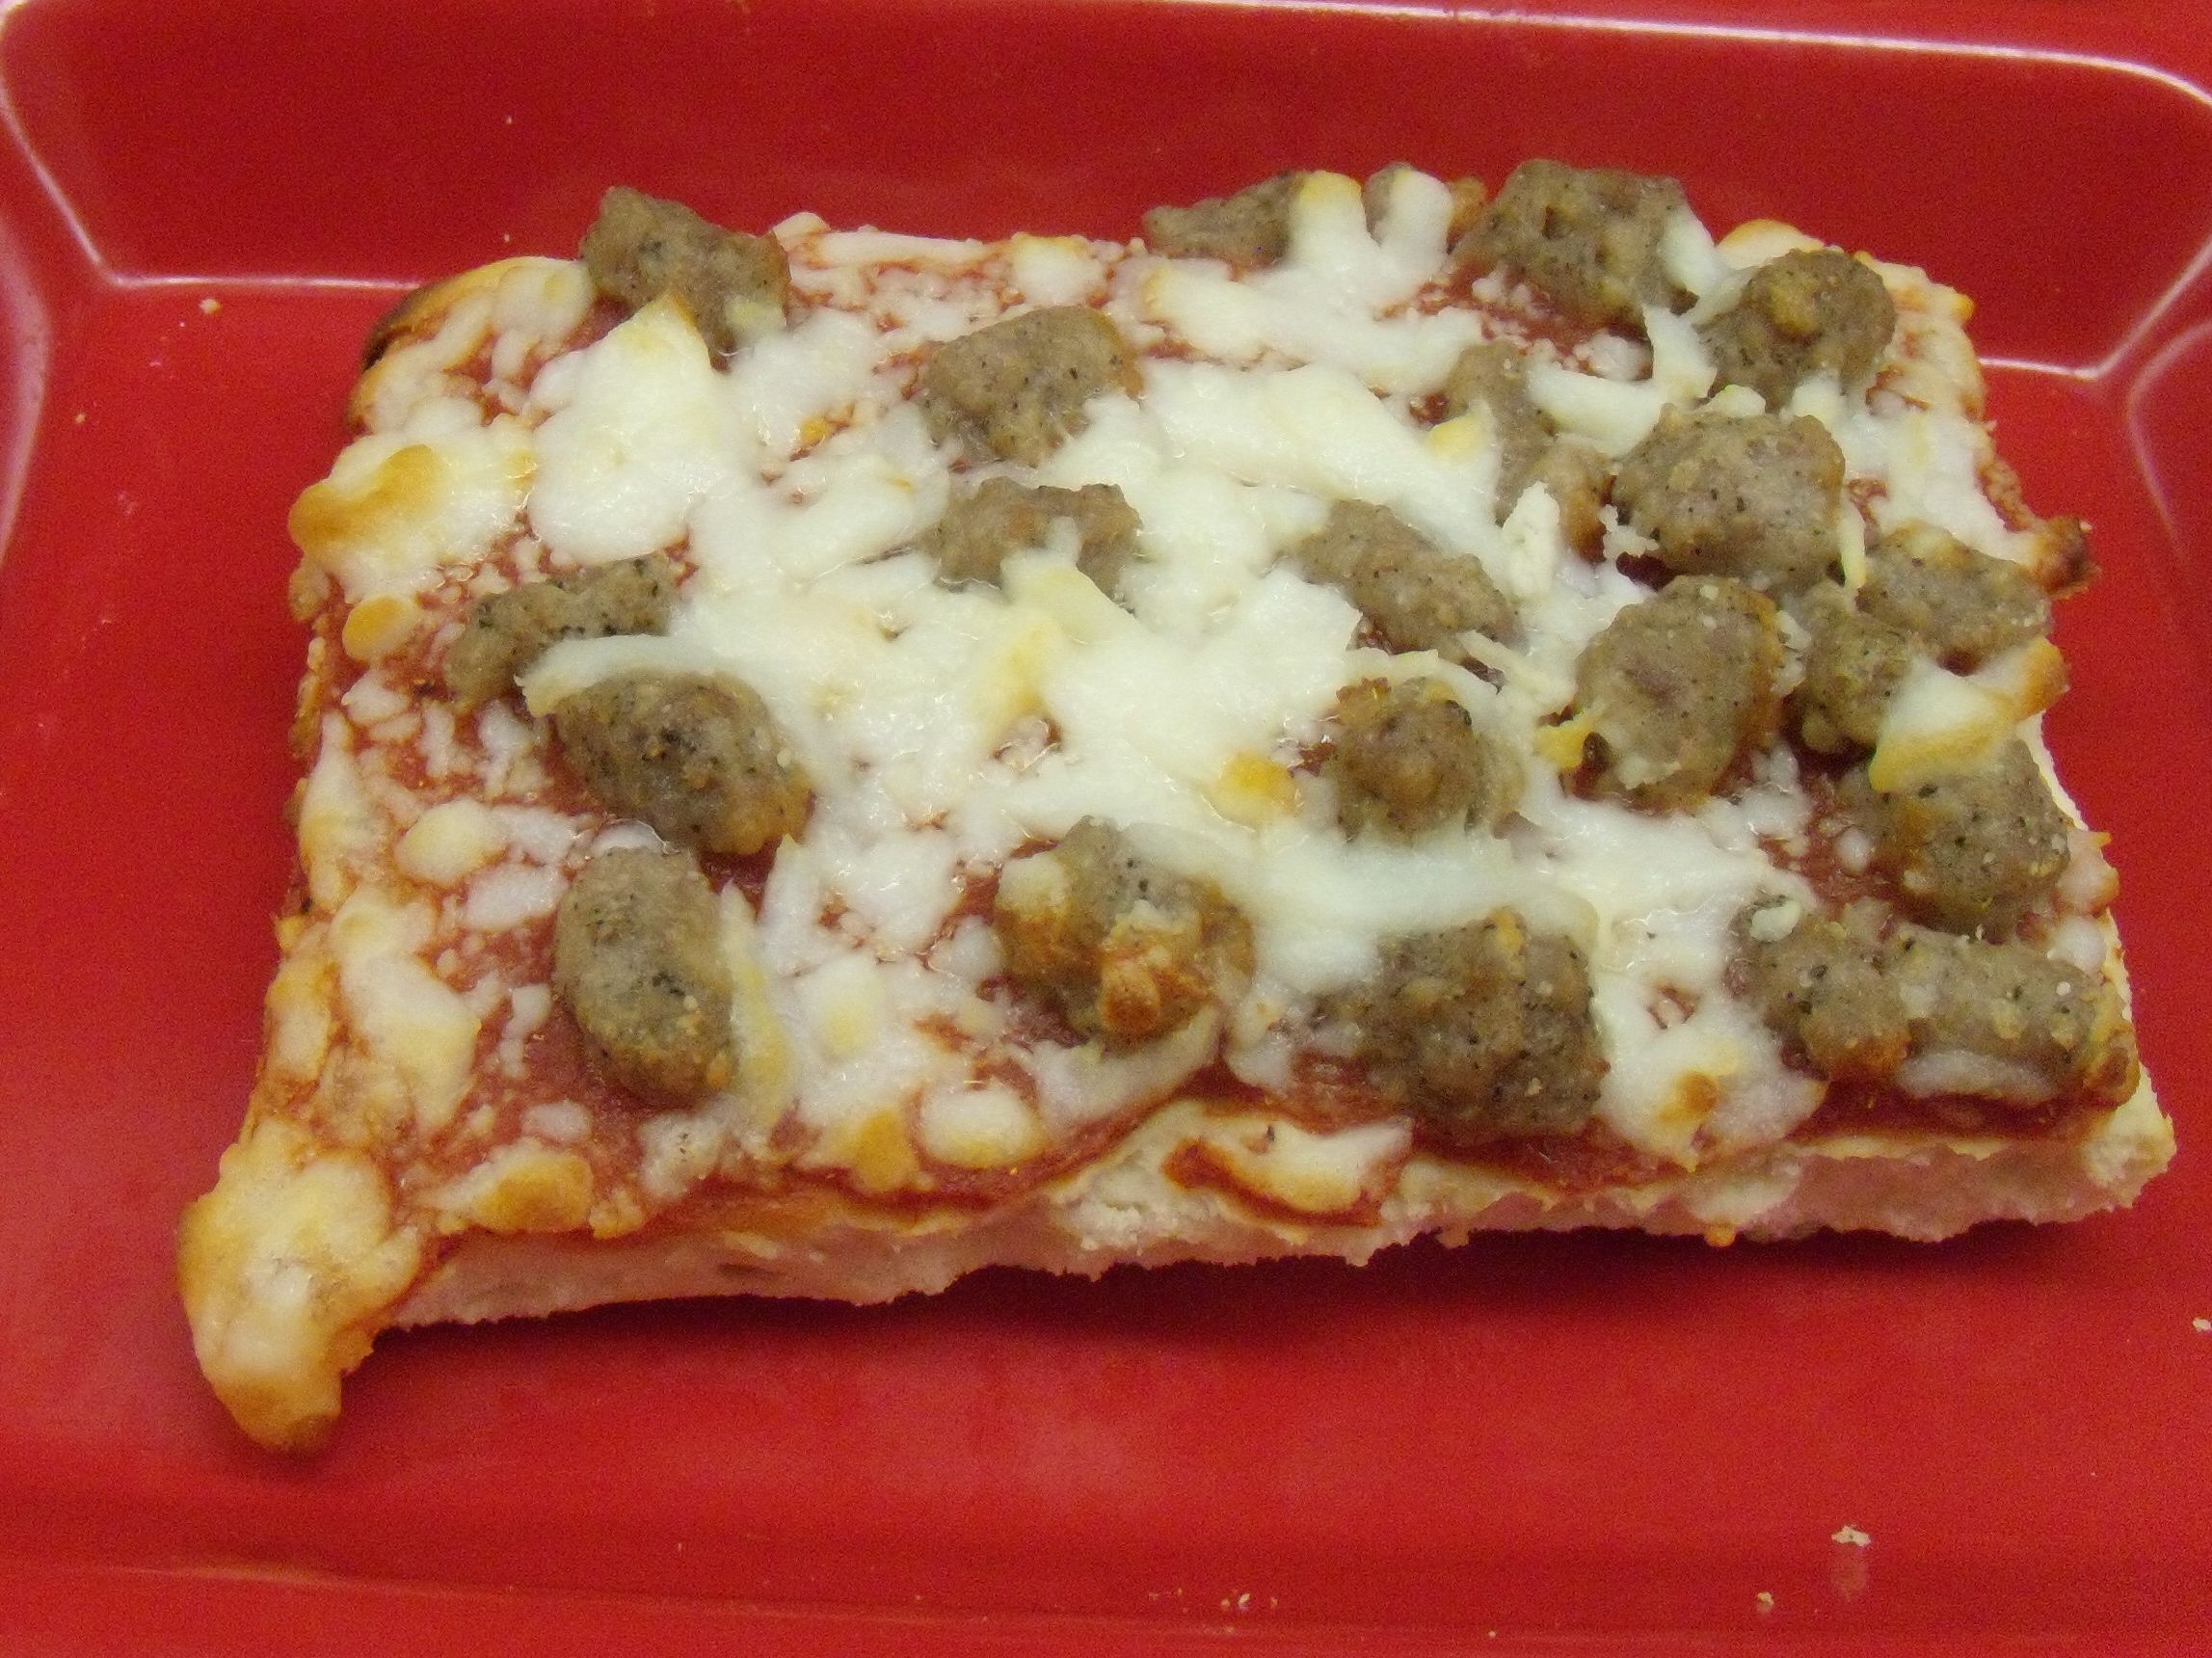 Sausage pizza from the cafeteria | Pics4Learning